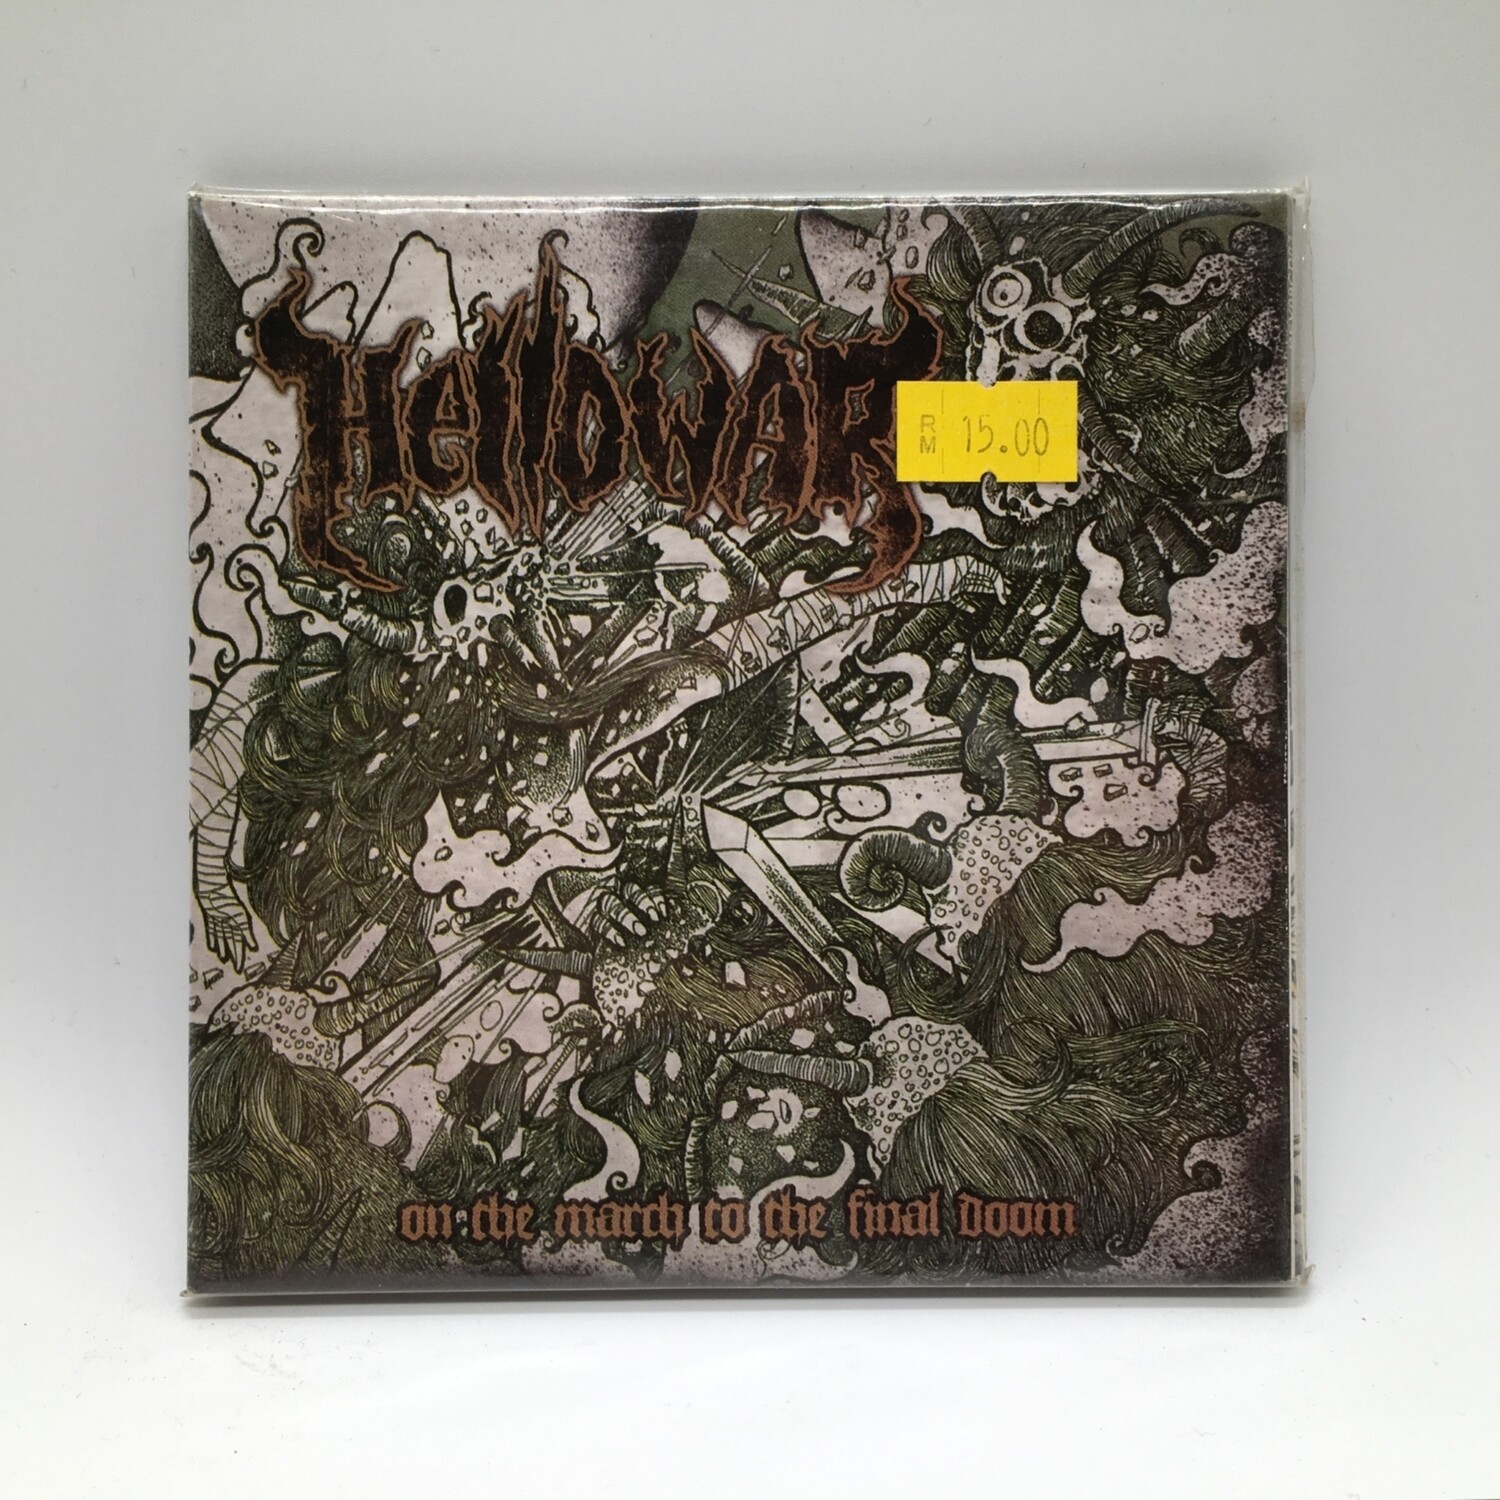 HELLOWAR -ON THE MARCH TO THE FINAL DOOM- CD